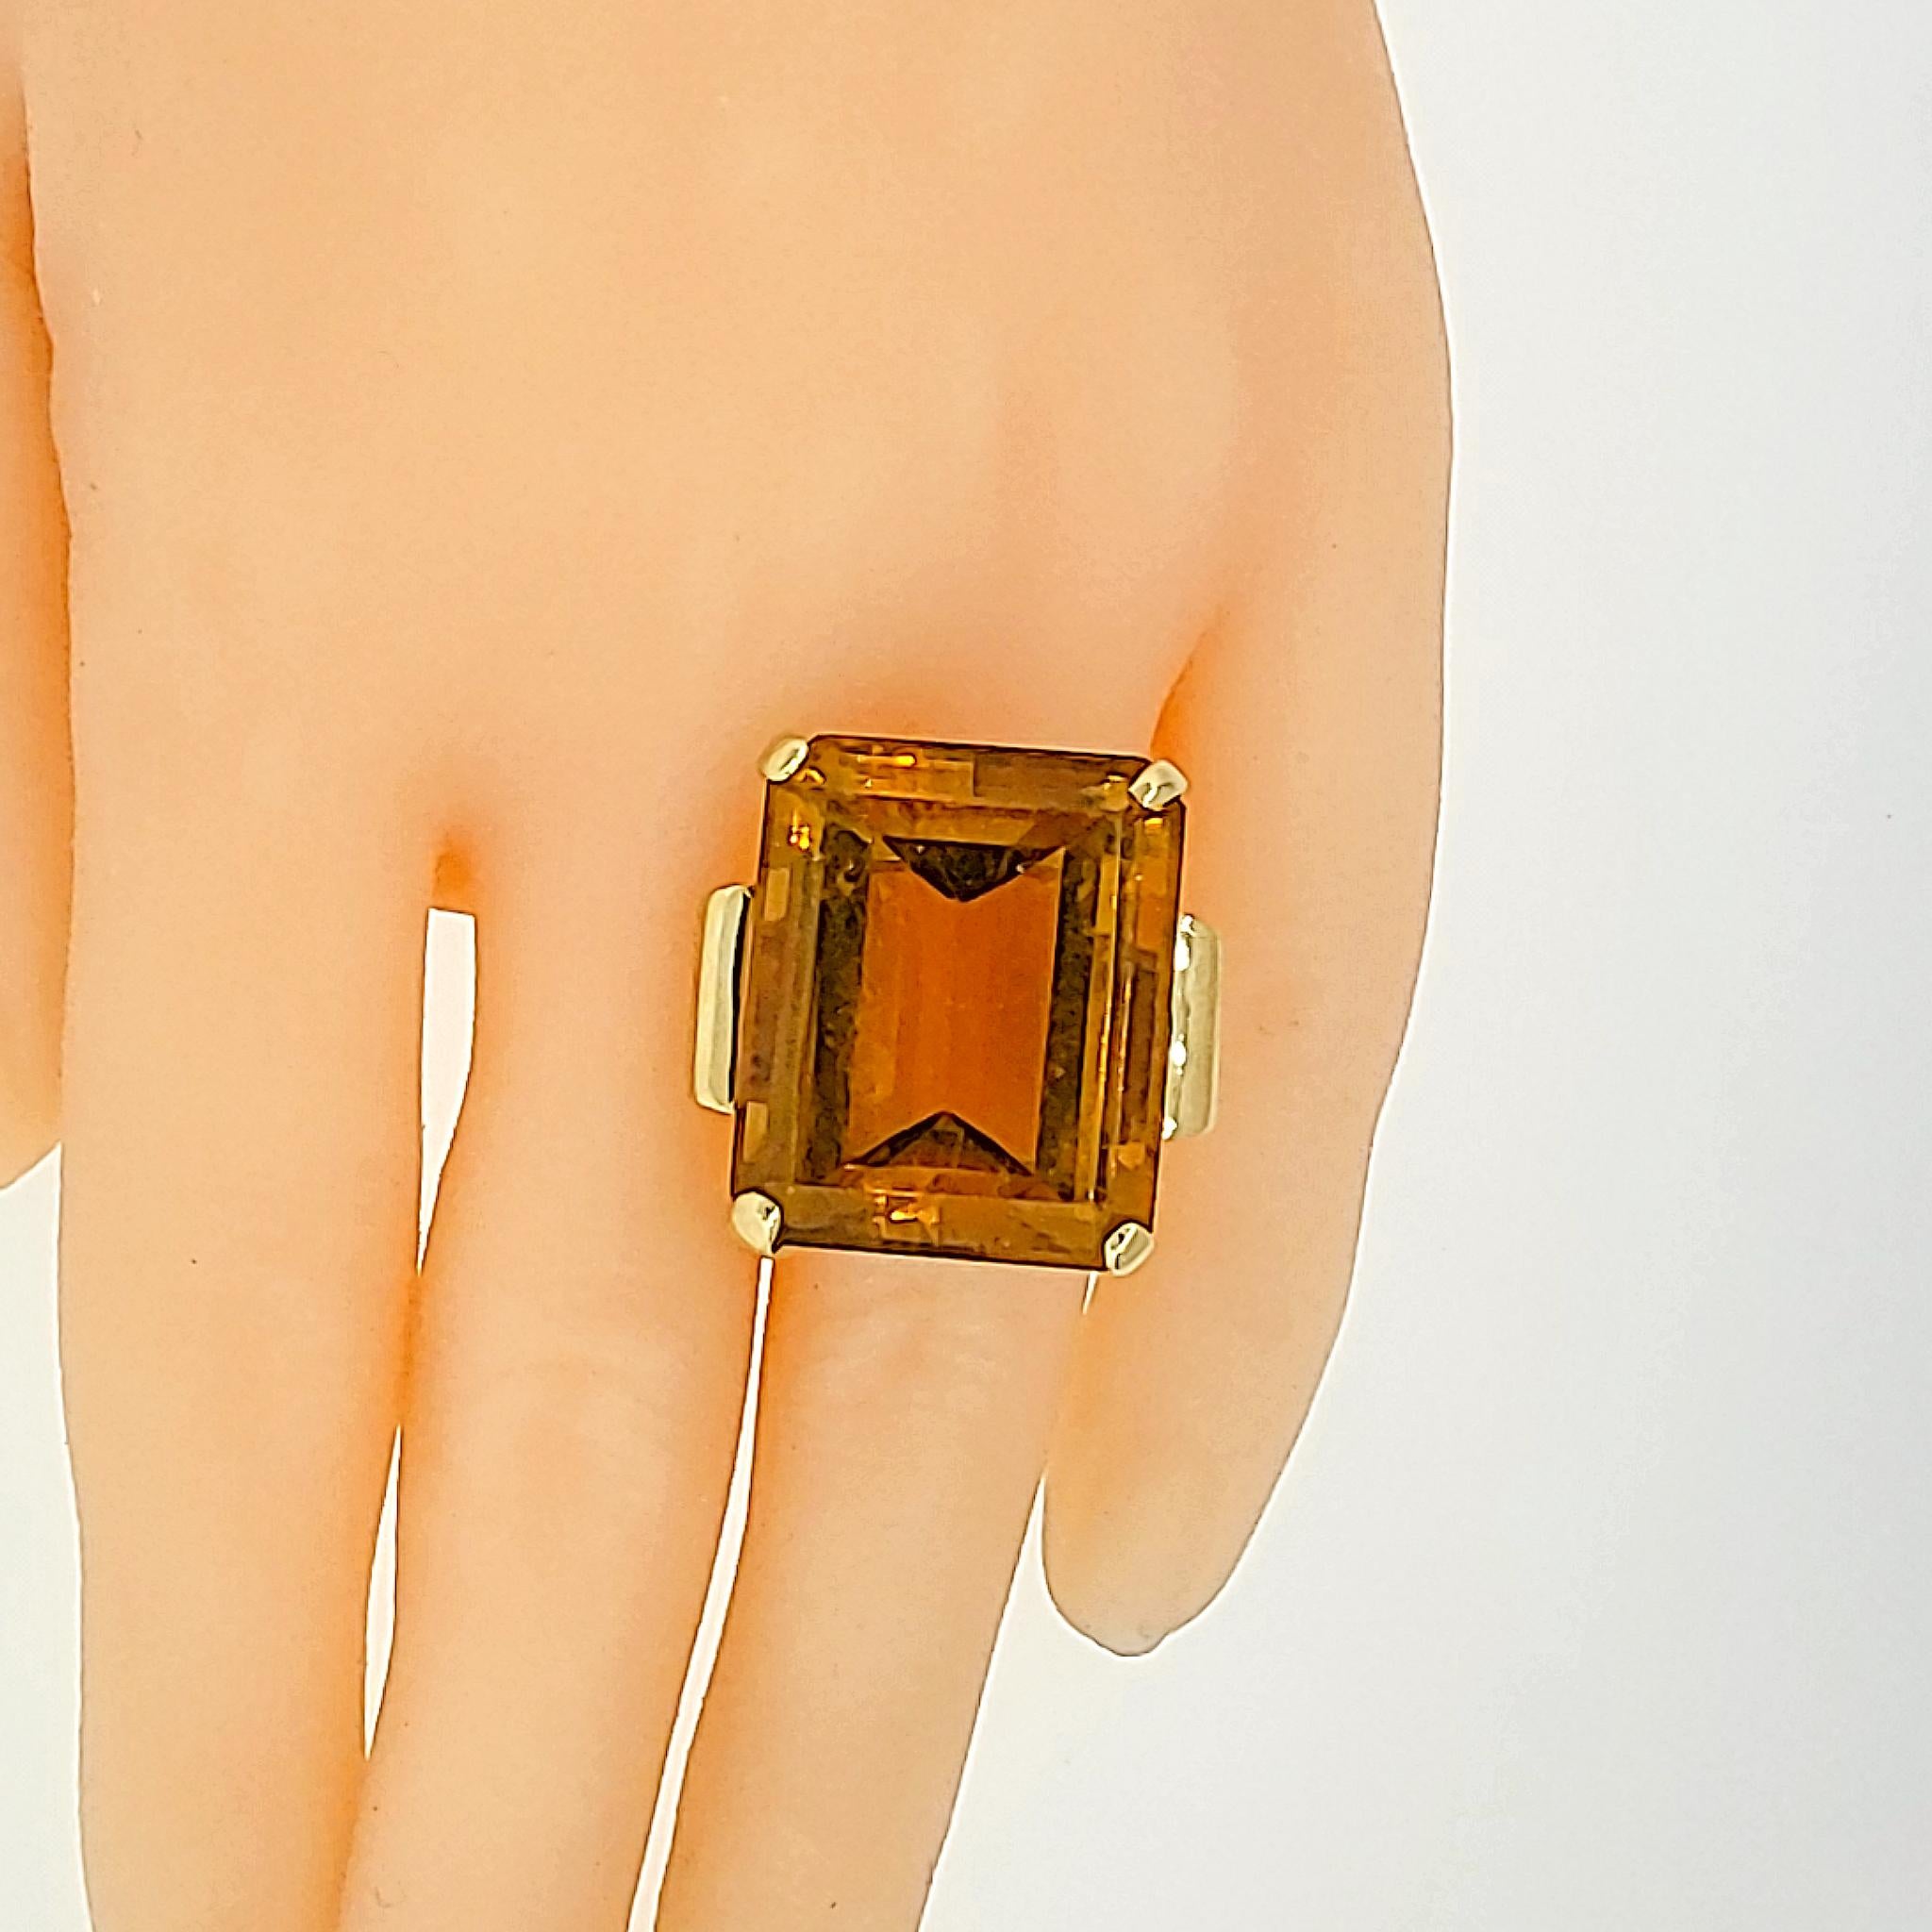 14k Yellow Gold
Citrine: 58.59 tcw (estimated)
Ring Size 5.5
Total Weight: 26.3 grams